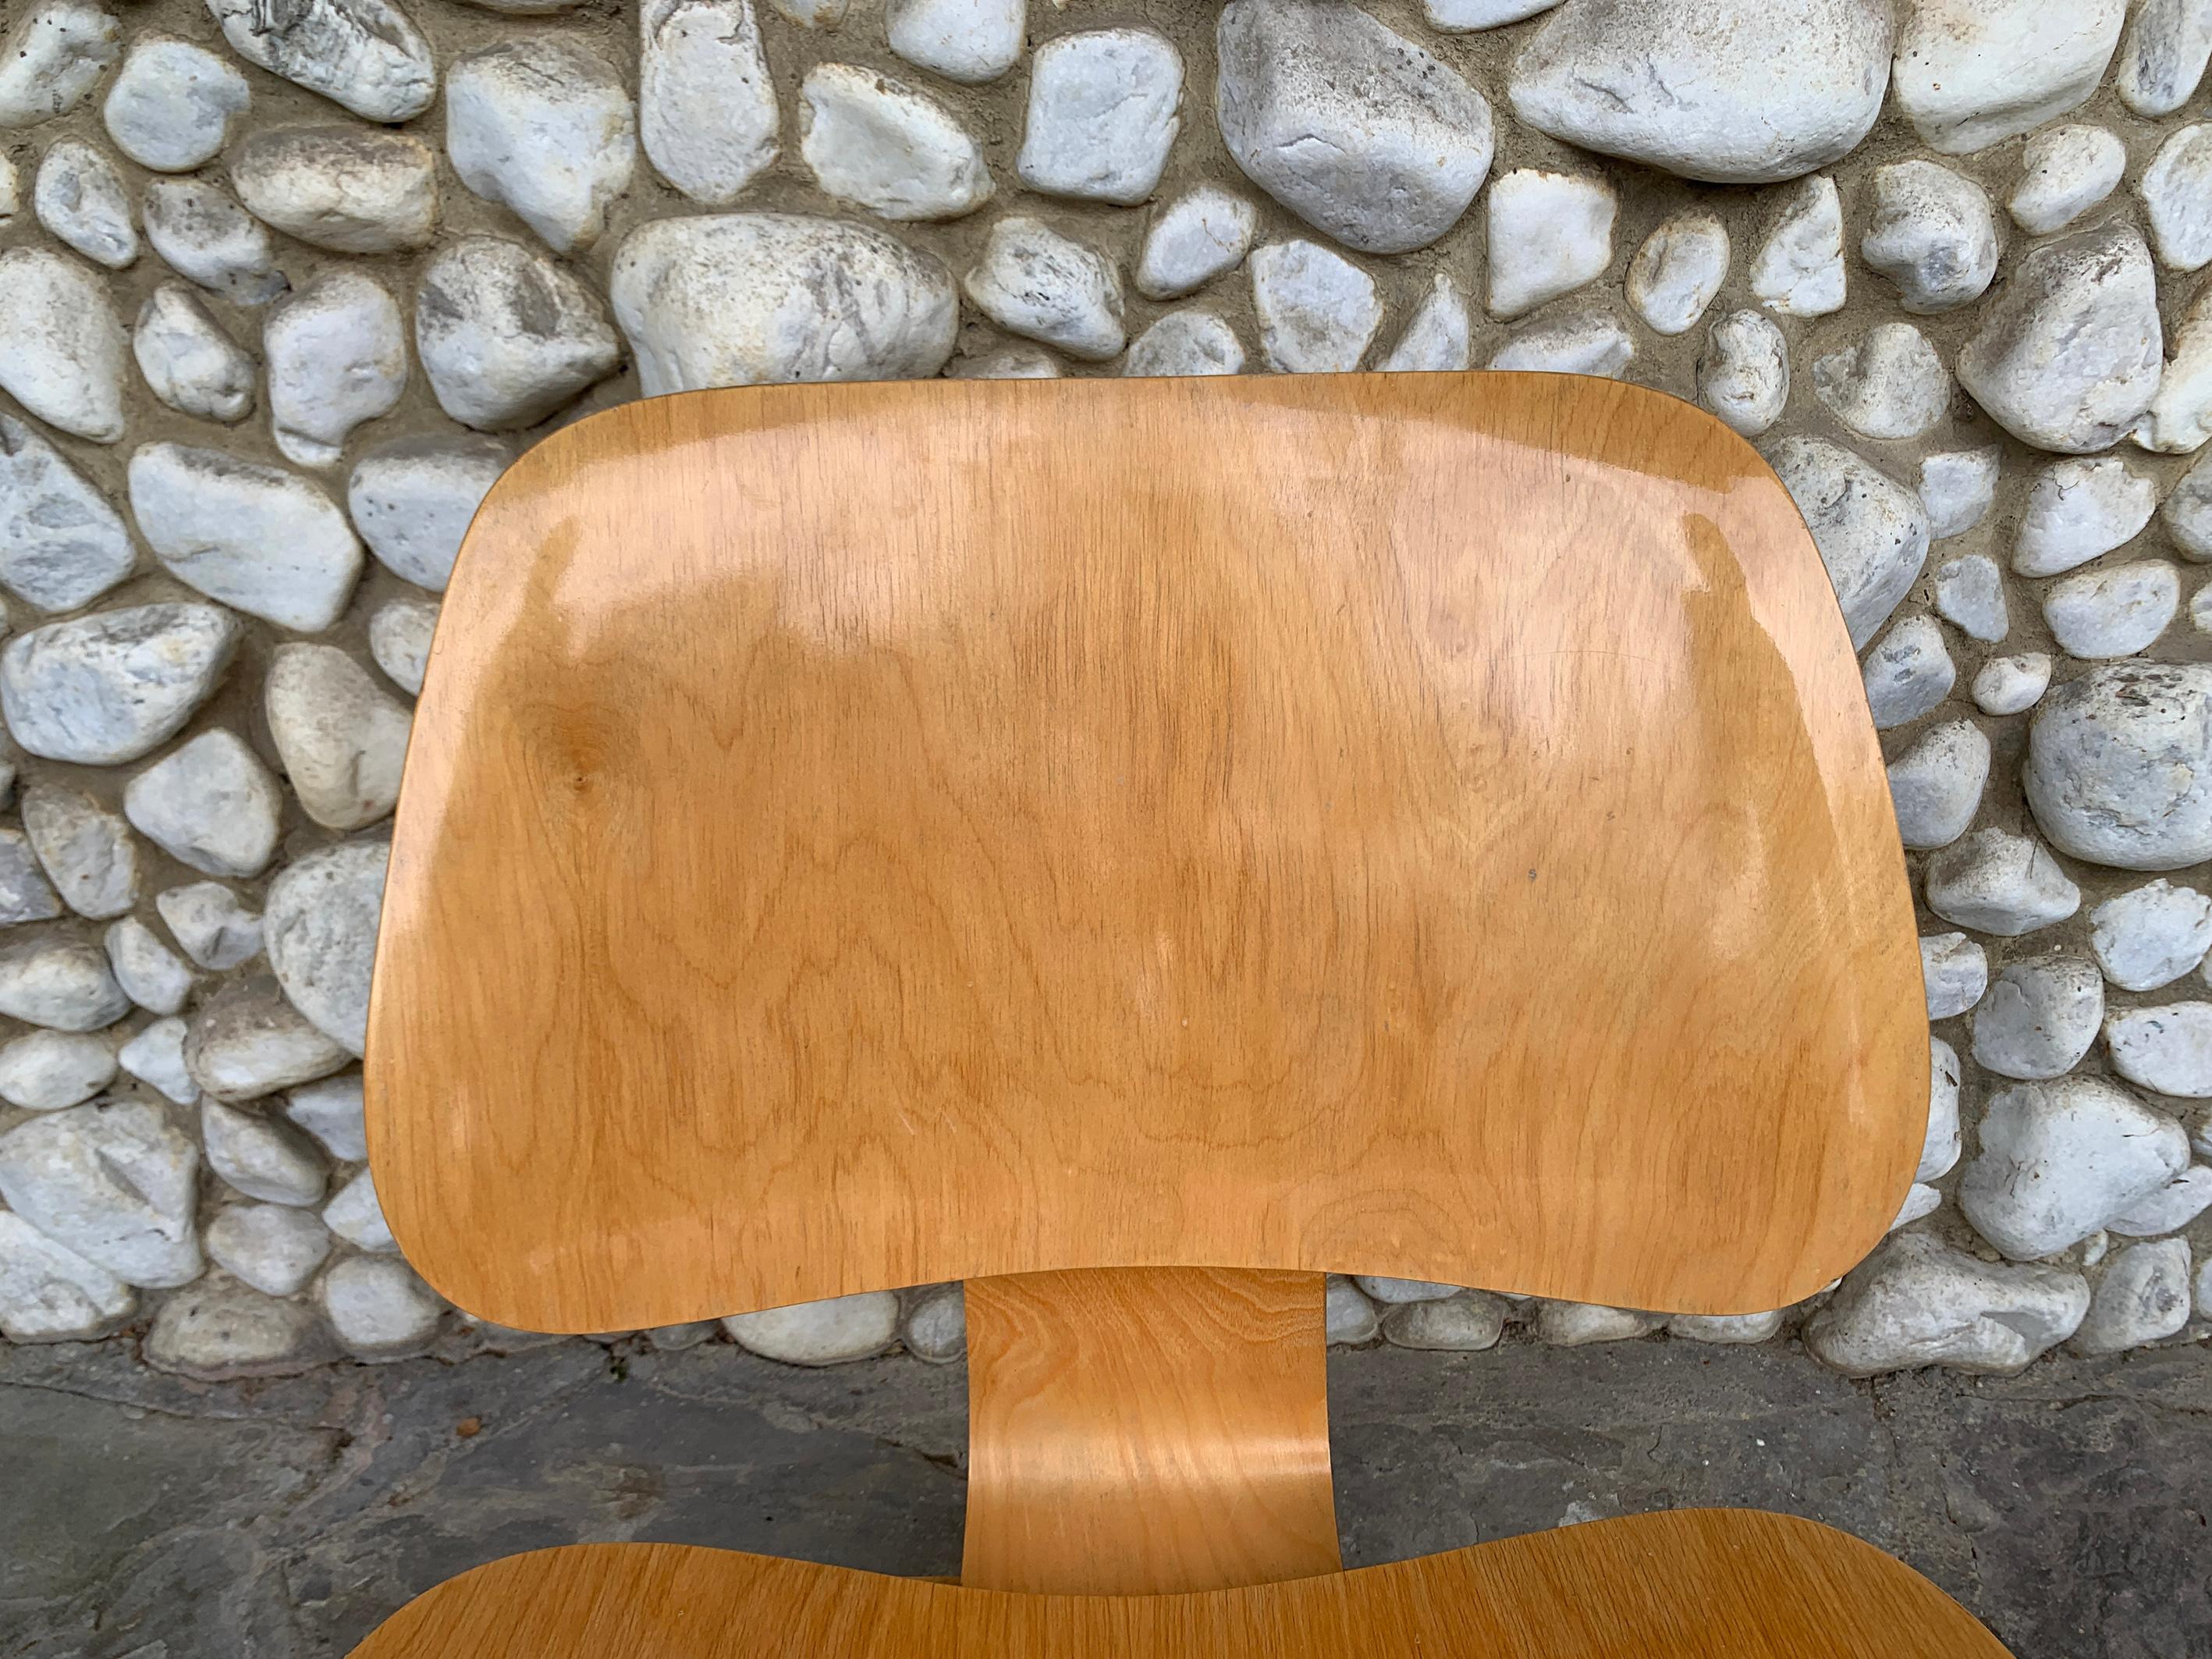 Veneer Early LCW Lounge Chair in Birch by Charles & Ray Eames, Herman Miller, 1950s For Sale